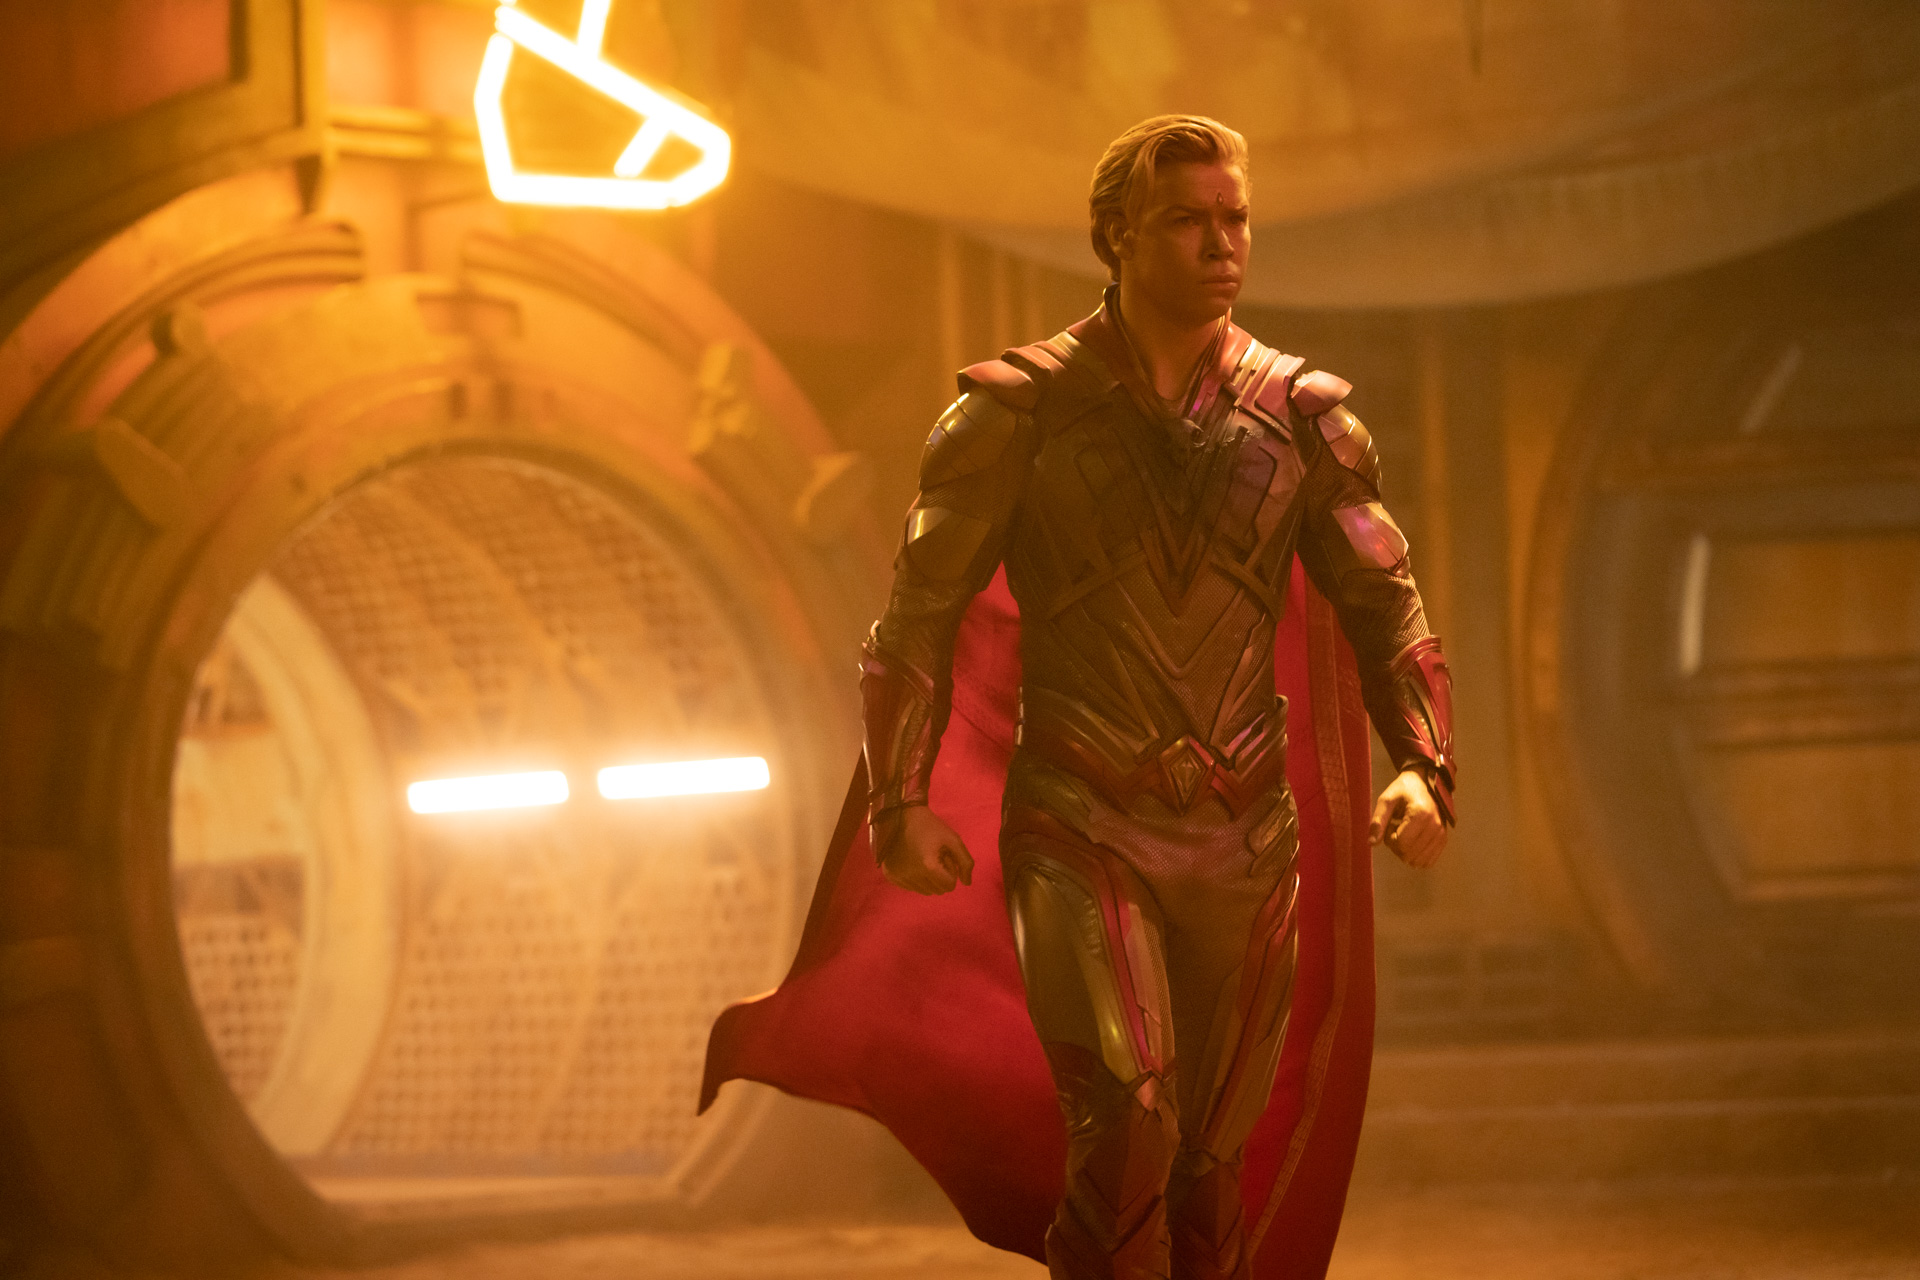 Will Poulter stands tall as Adam Warlock in Guardians of the Galaxy Vol. 3. The room he stands in glows gold, while Will wears a metallic suit and red cape. His blond hair is combed to one side.